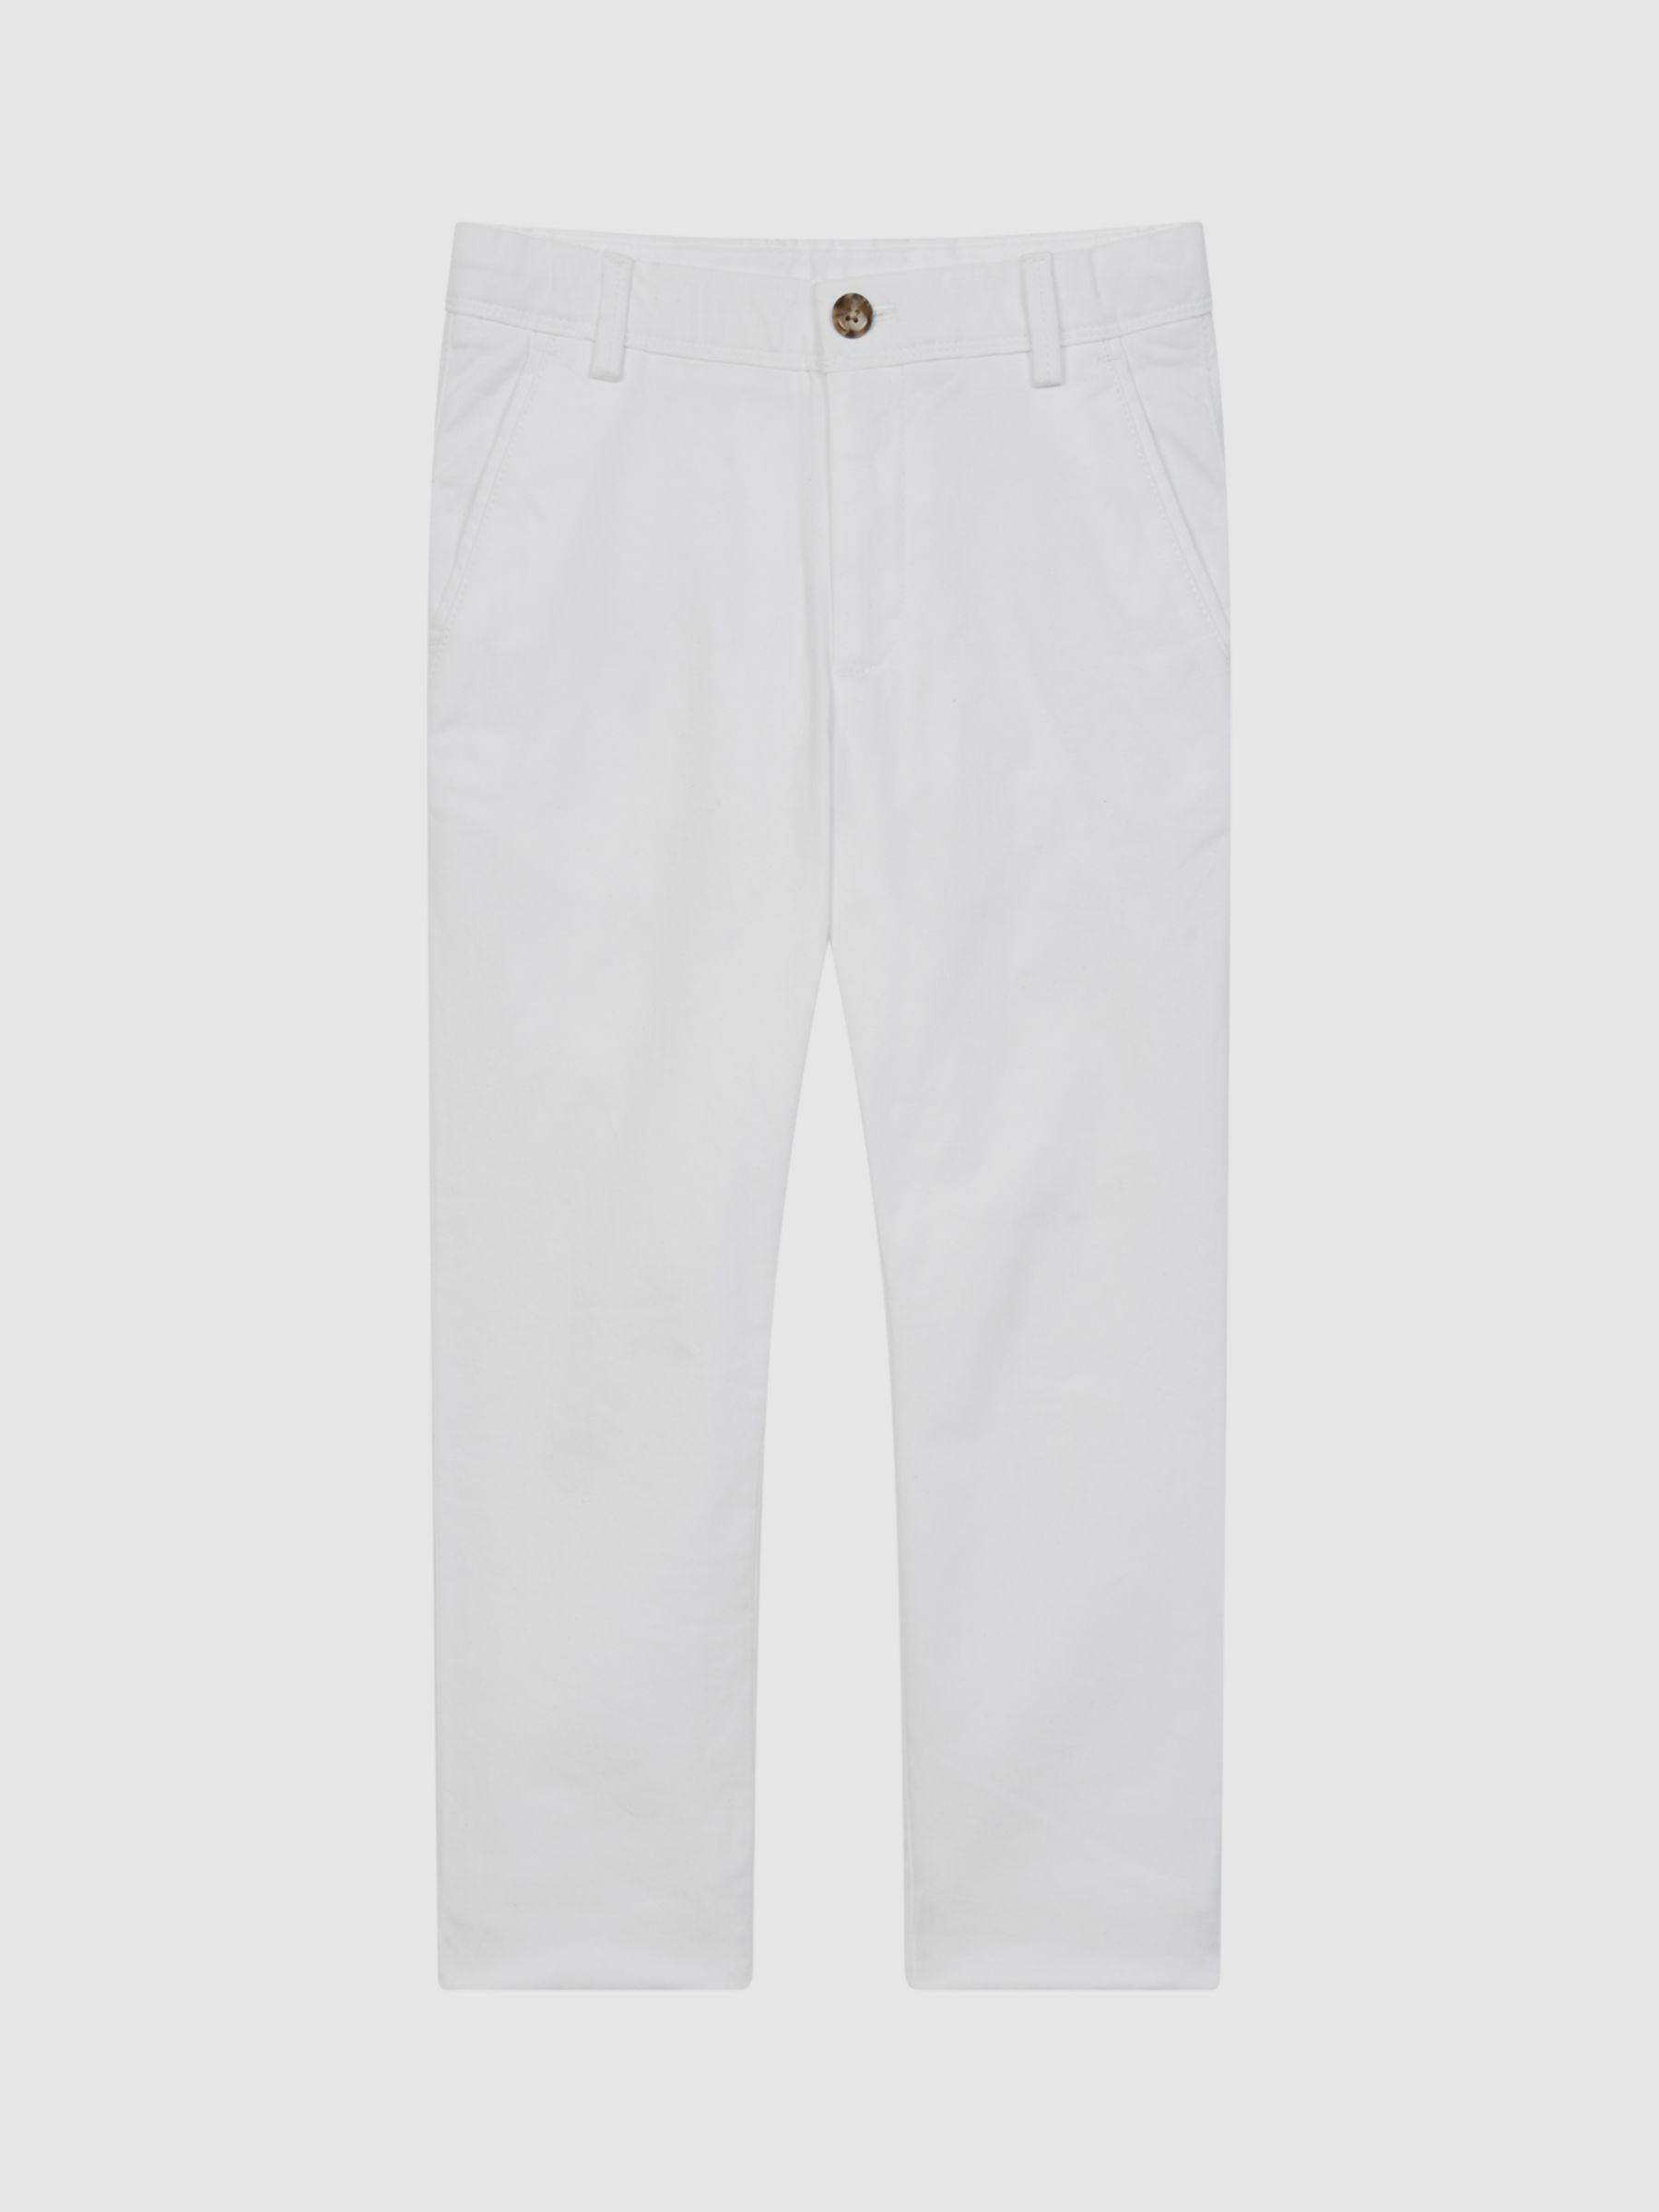 Reiss Kids' Pitch Slim Fit Chino Trousers, White at John Lewis & Partners